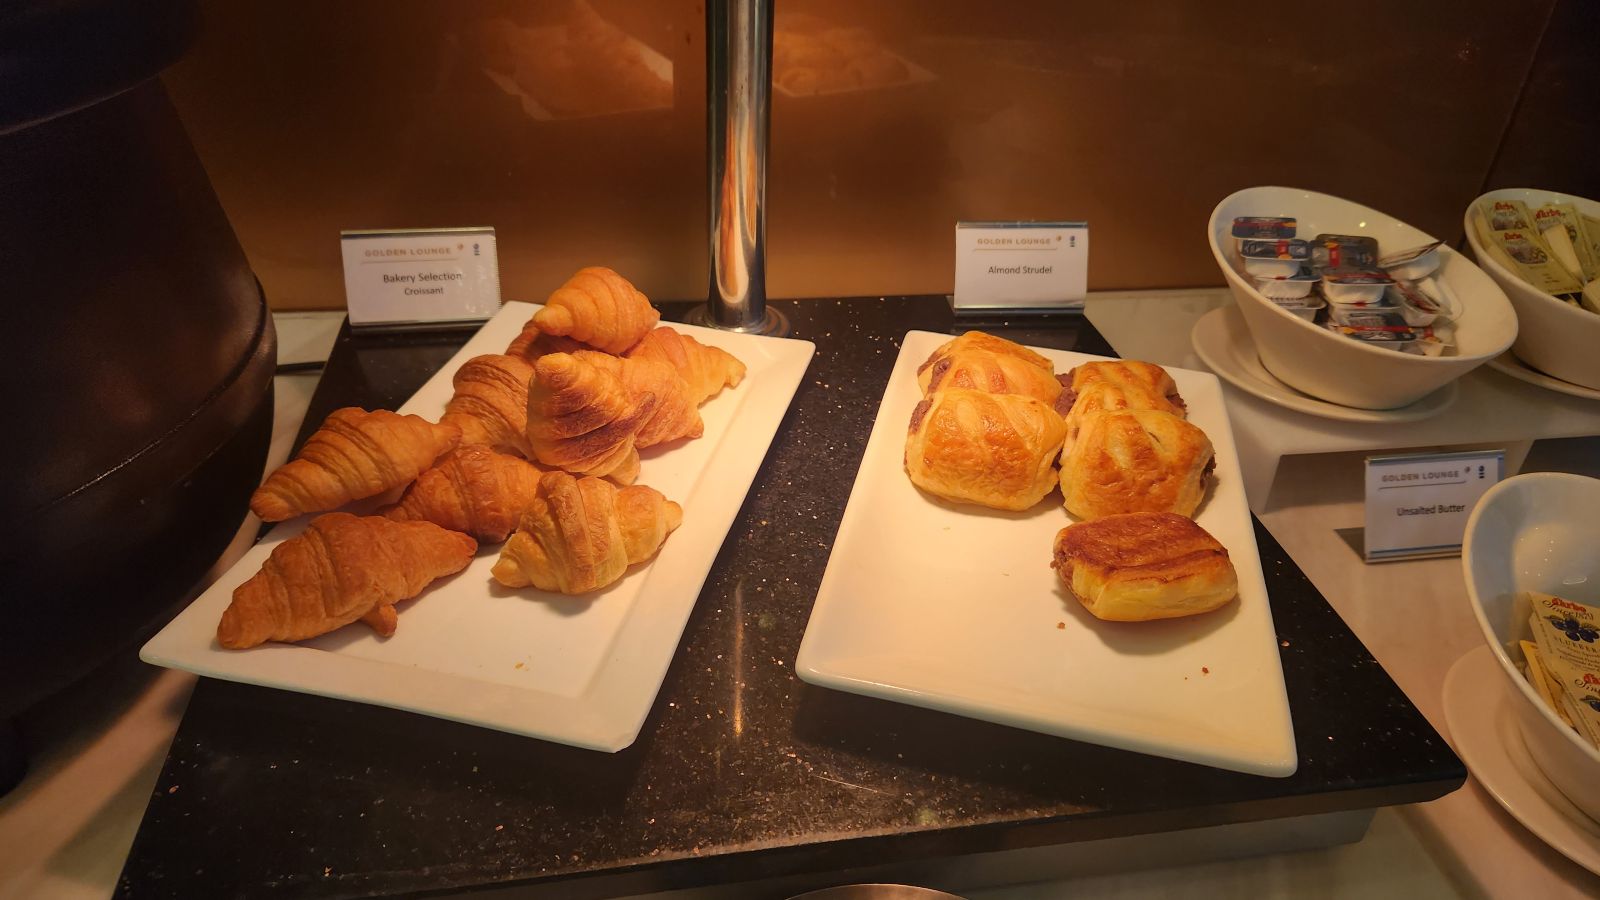 Pastries in the lounge